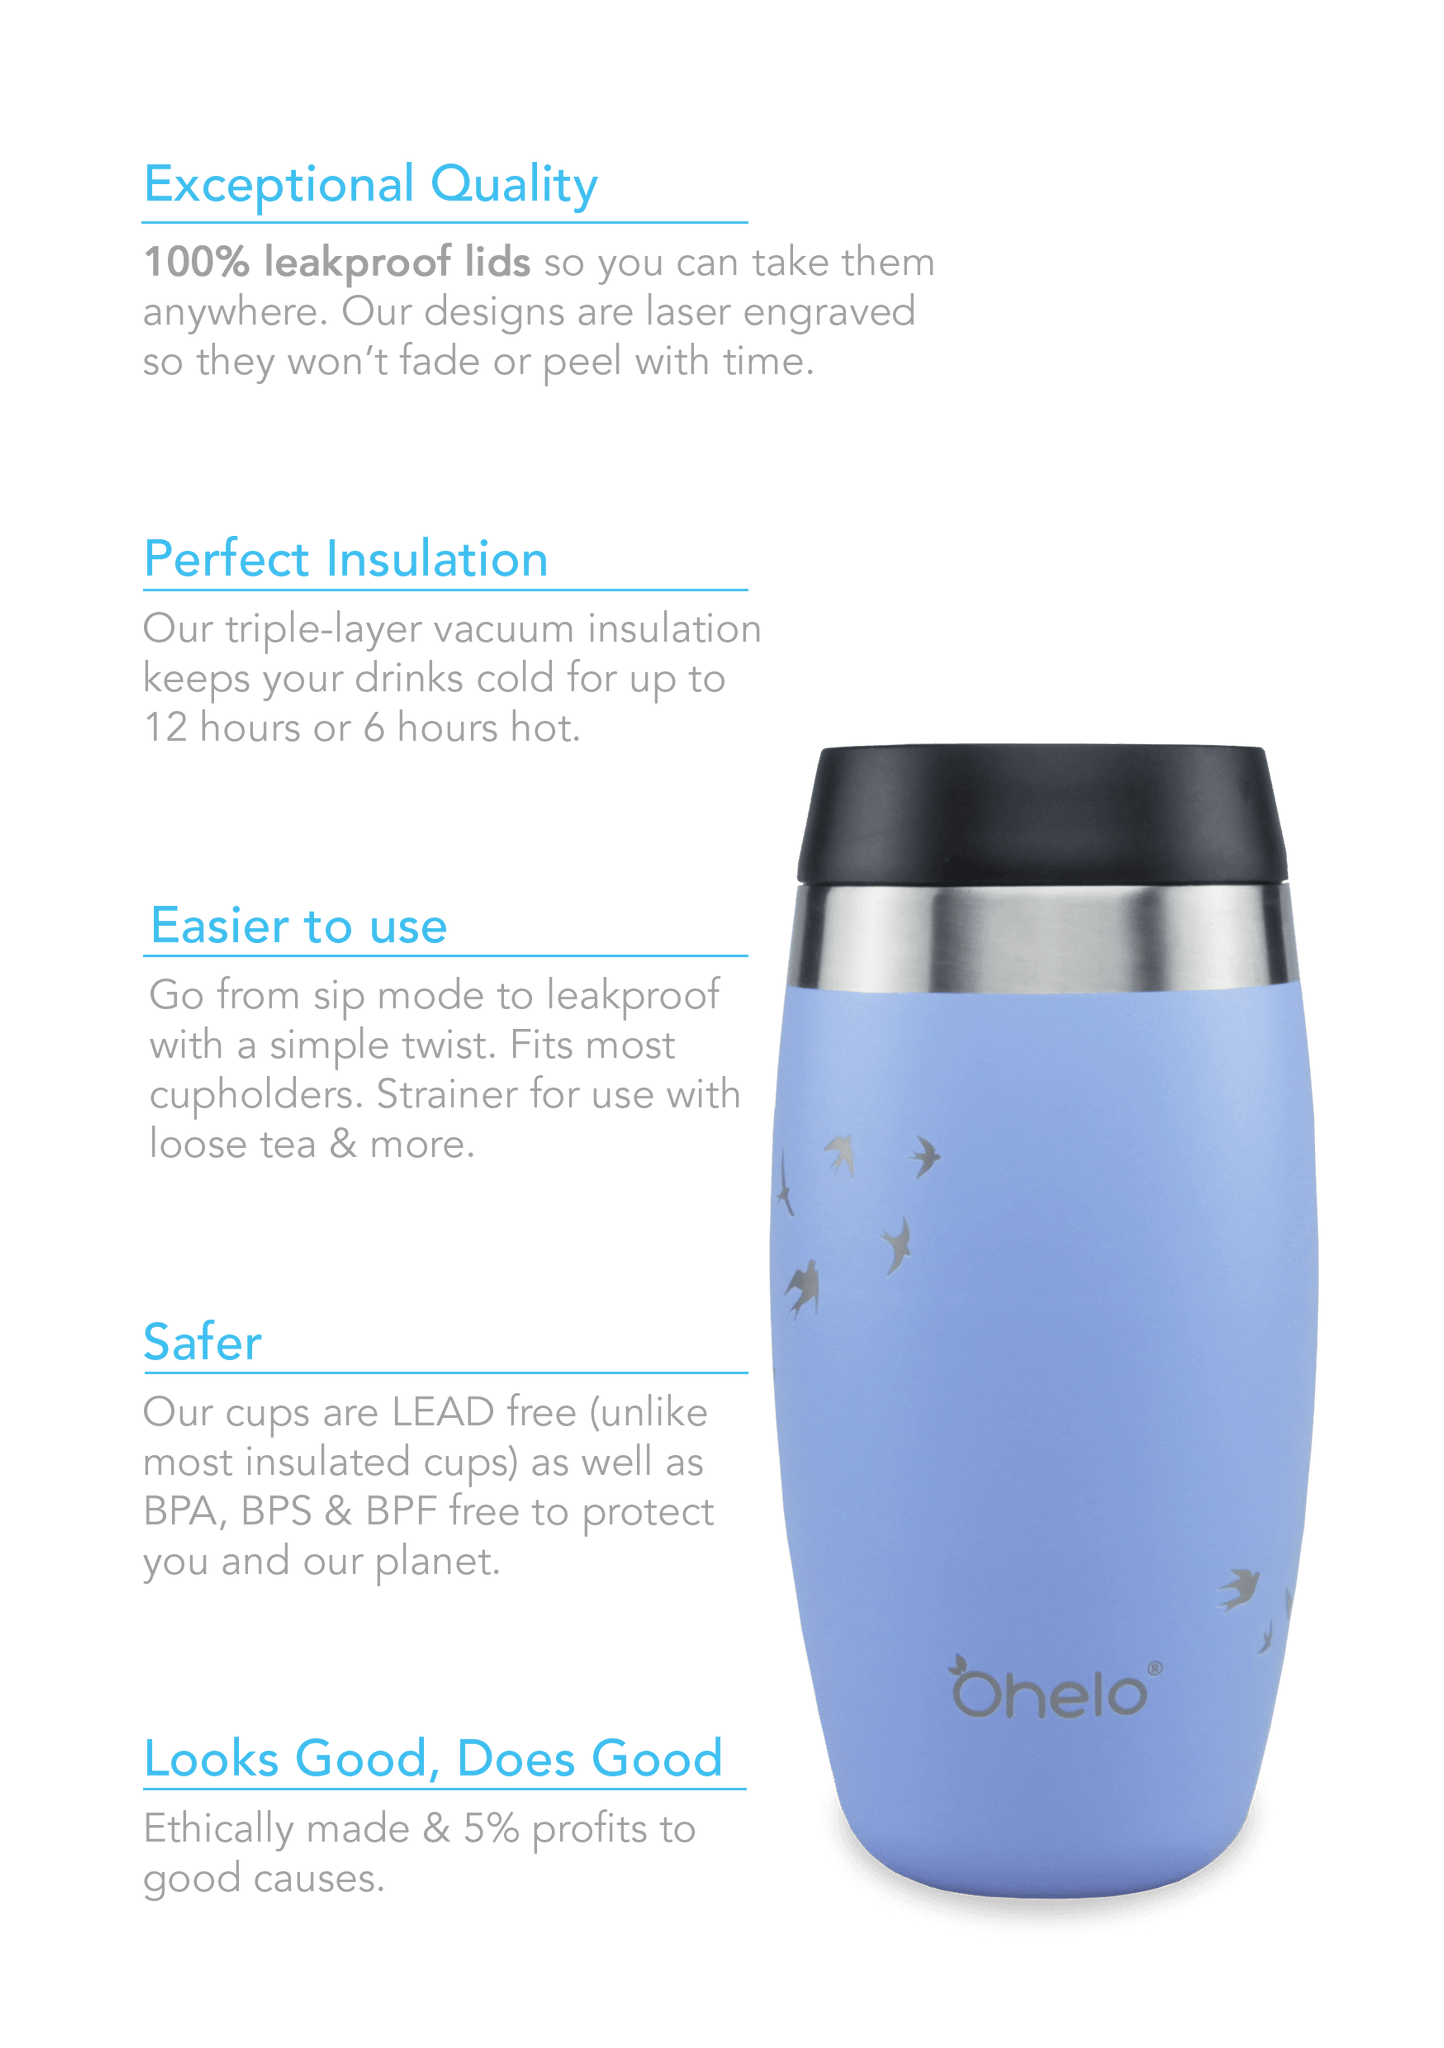 USPs for Ohelo insulated stainless steel reusable travel cup - perfect insulation, exceptional quality, easier to use, safer and looks good, does good